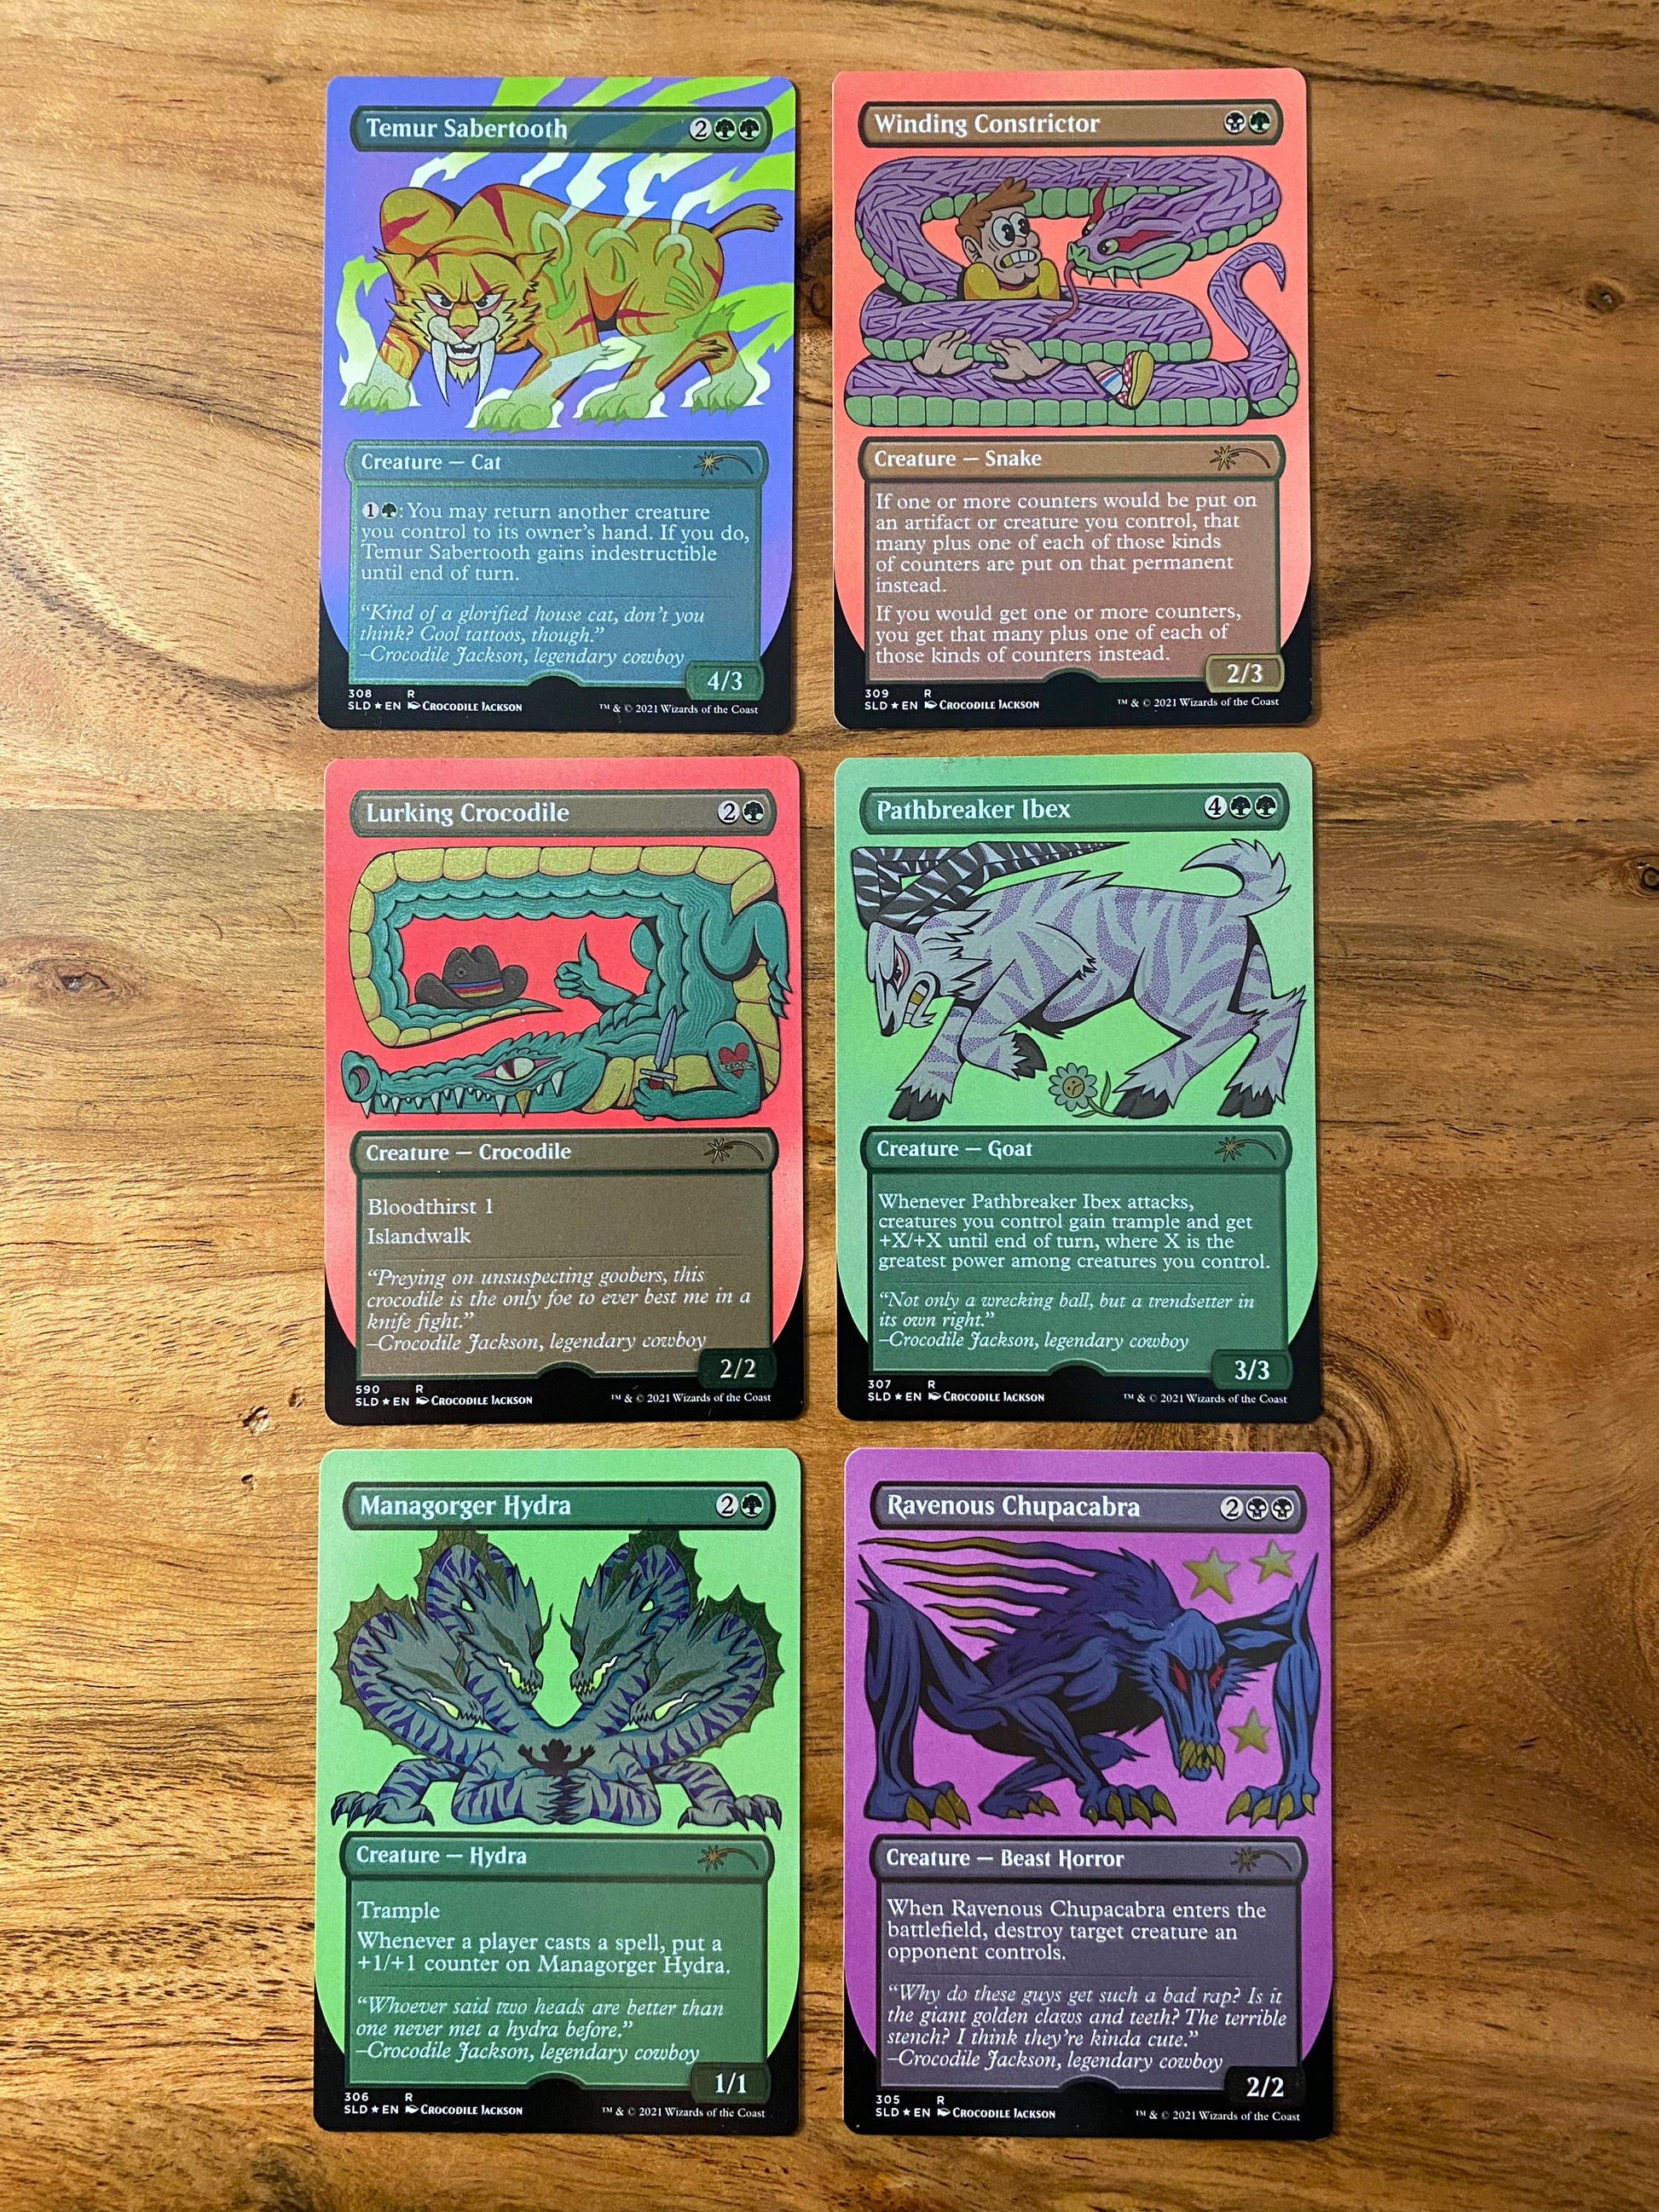 A set of 6 trading cards that shimmer in the light when you move them. Each card has a cartoon animal and are part of the Magic the Gathering Secret Lair game by Hasbro.